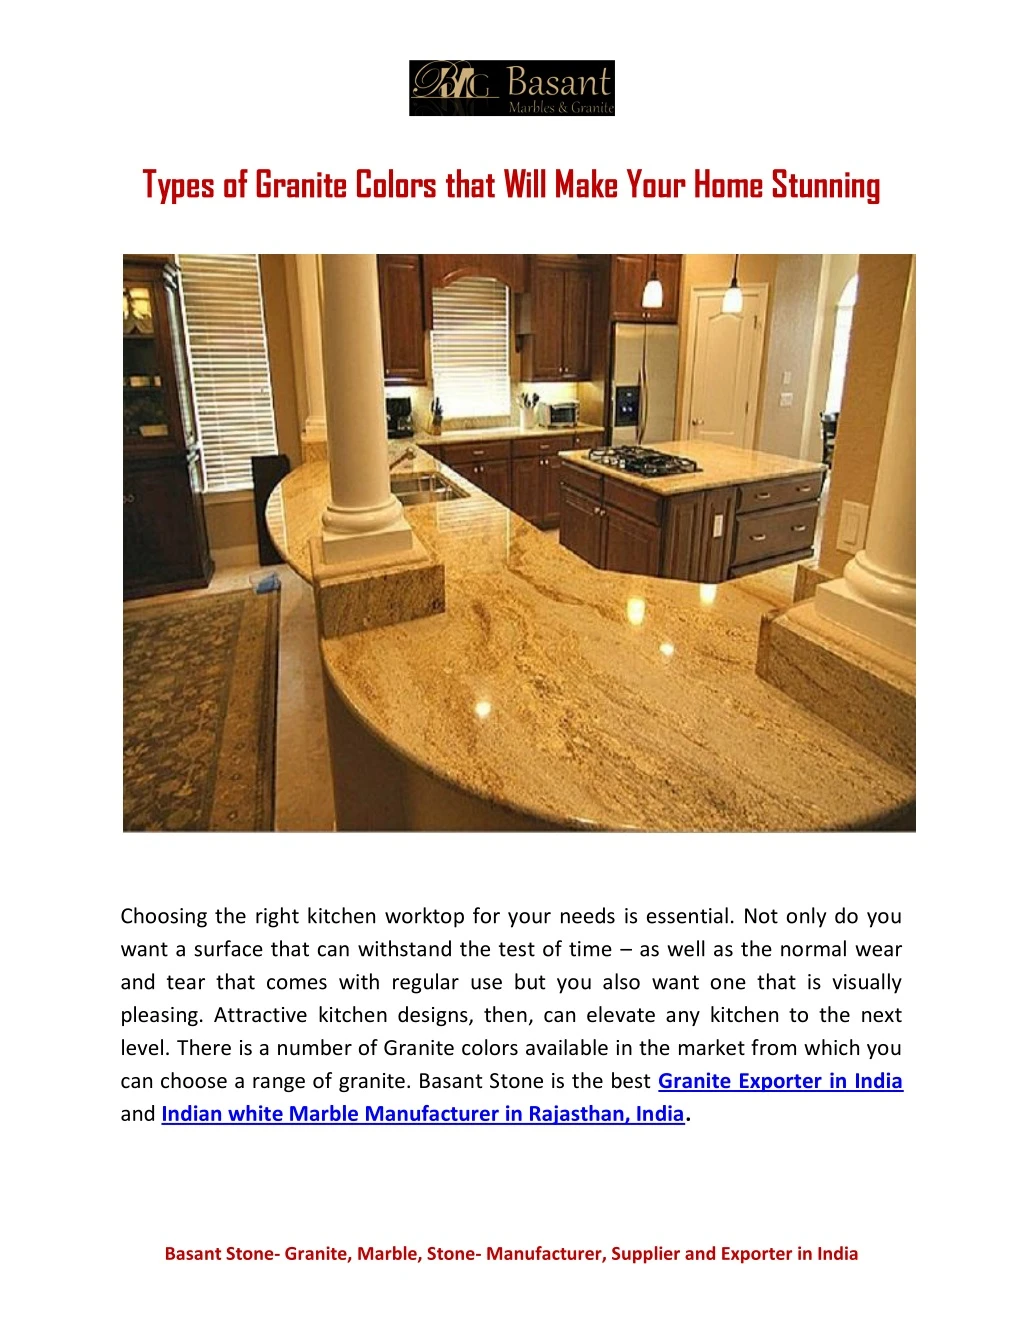 types of granite colors that will make your home